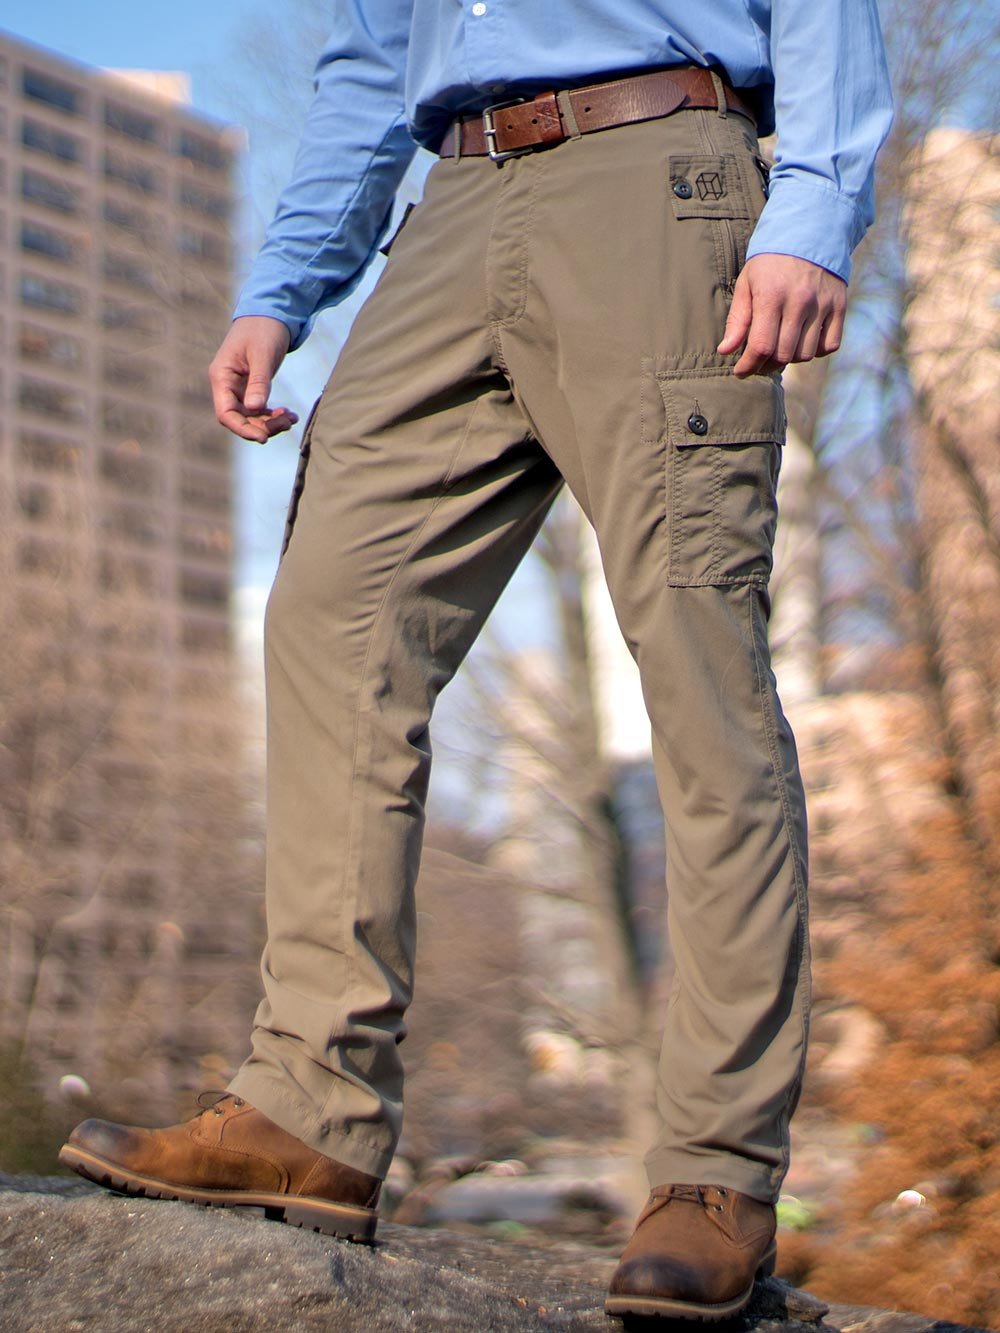 The Comfiest Airplane Pants for Travel